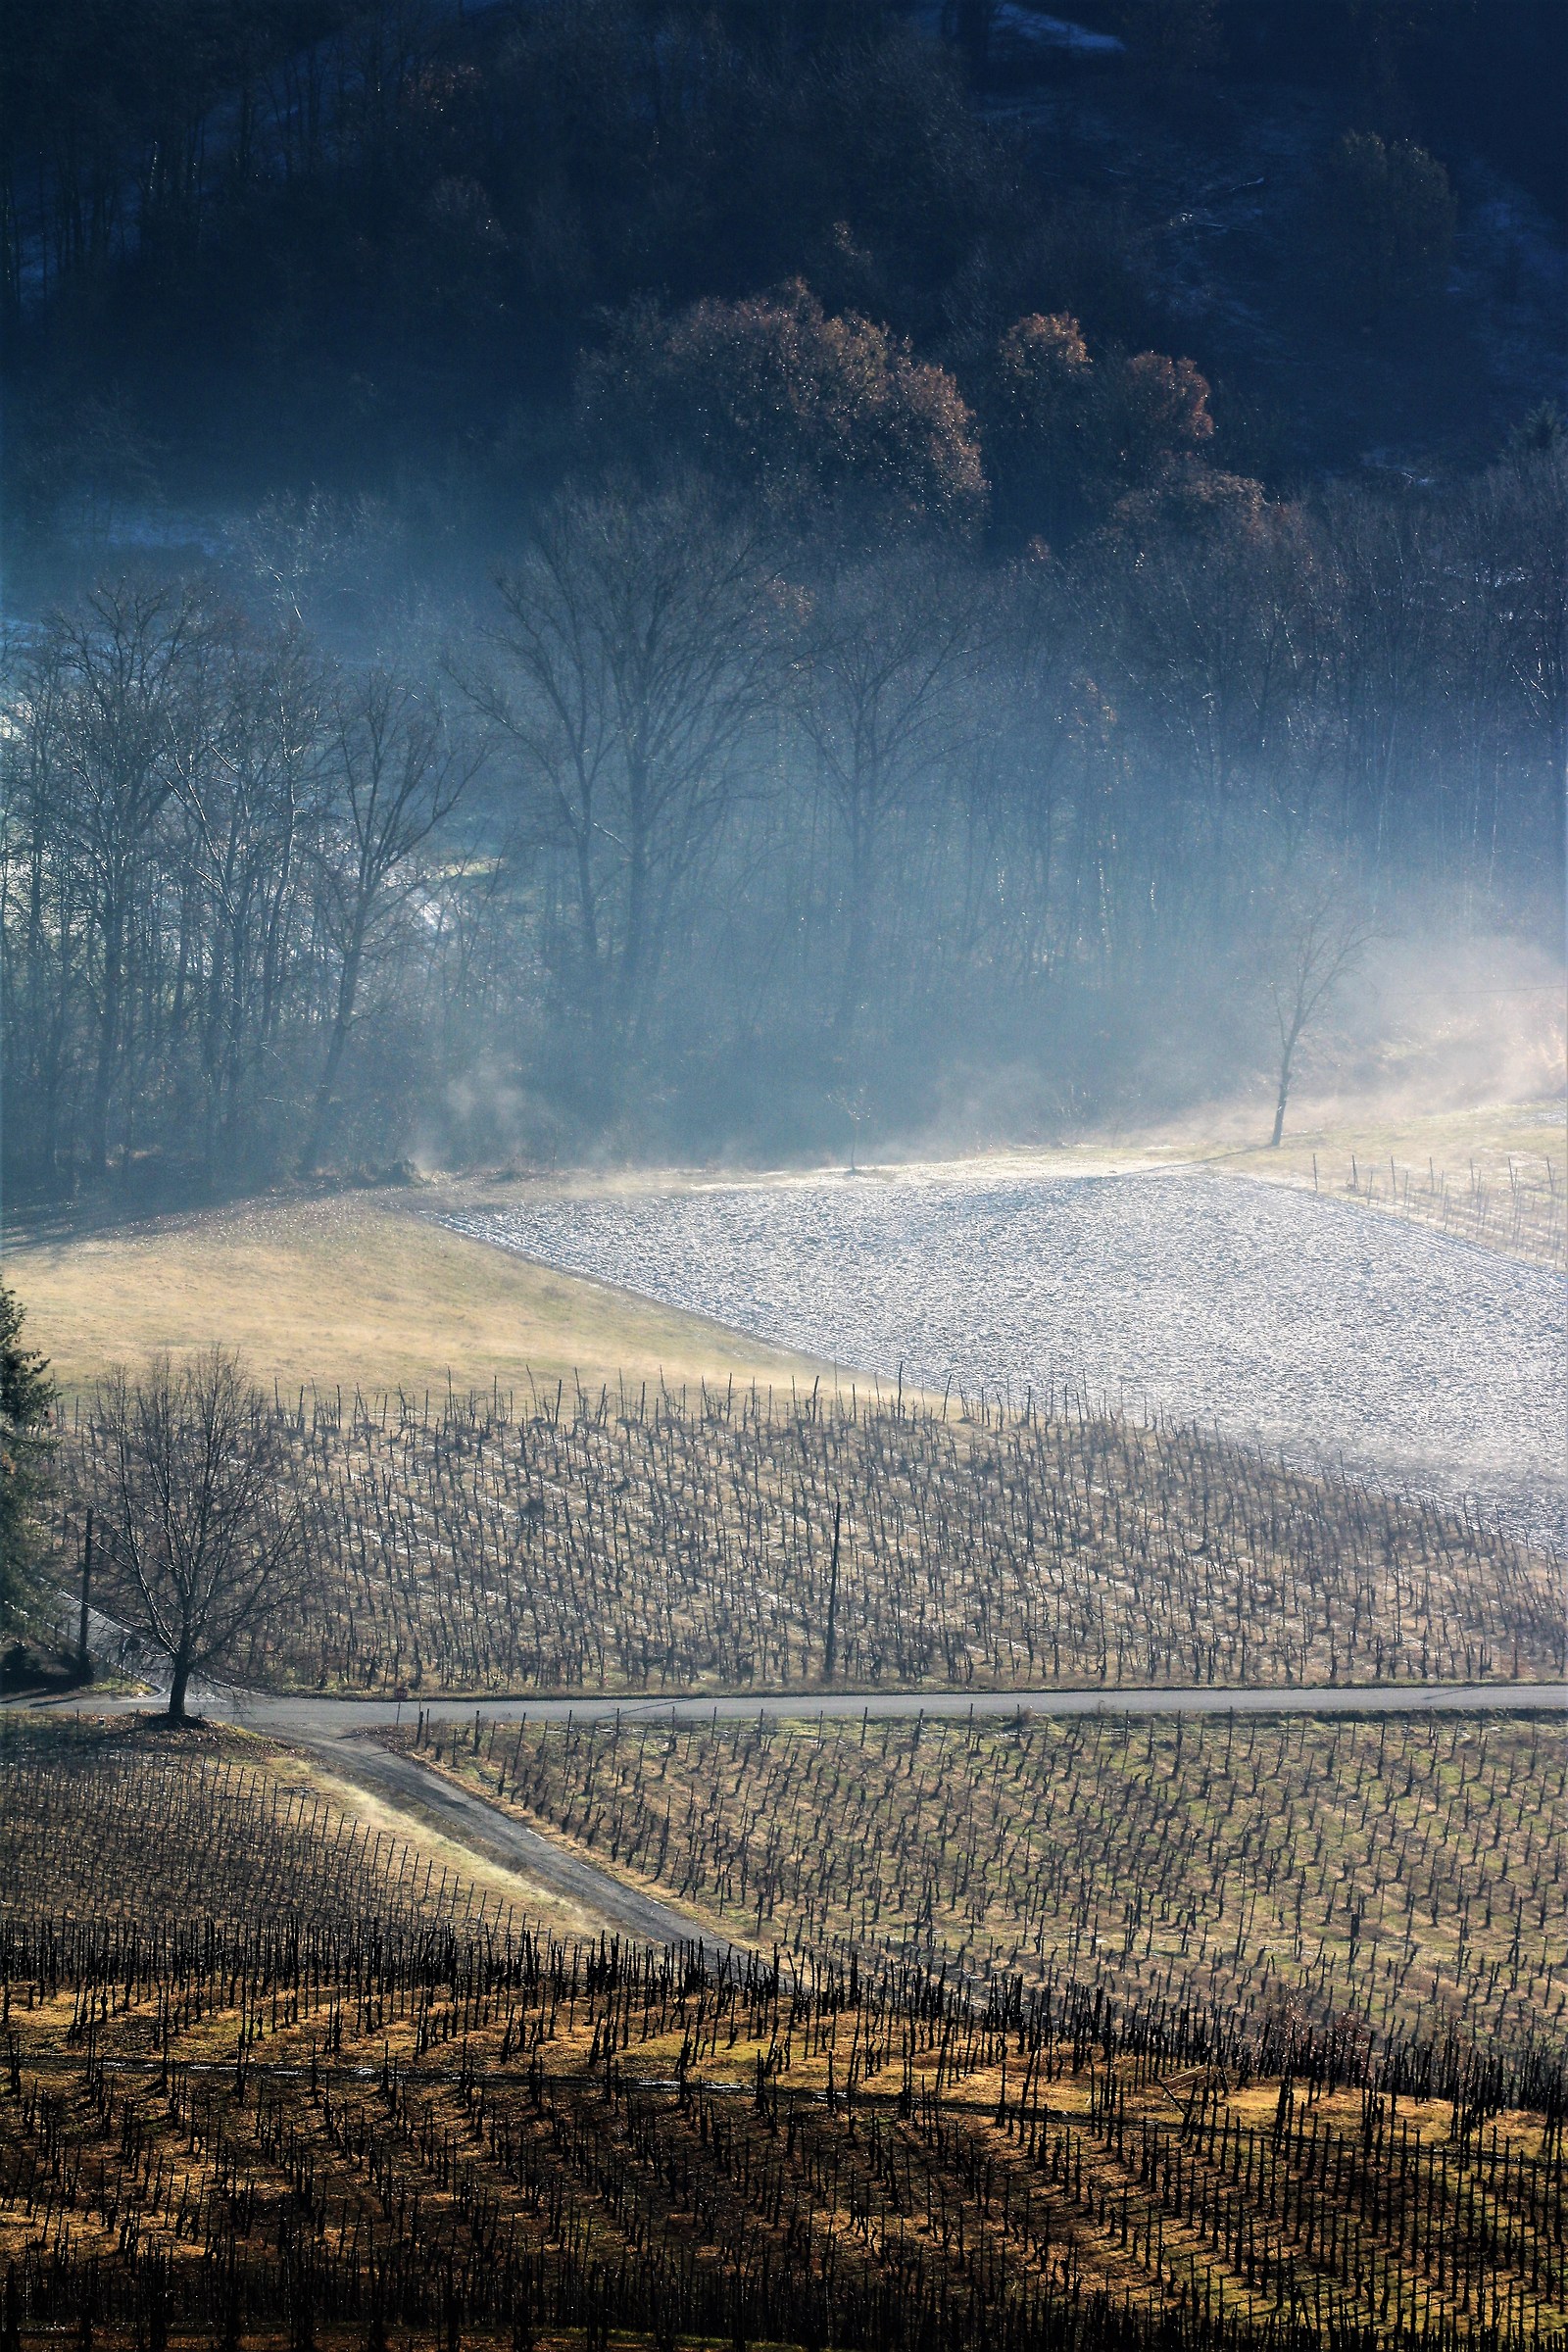 cold among the vineyards...